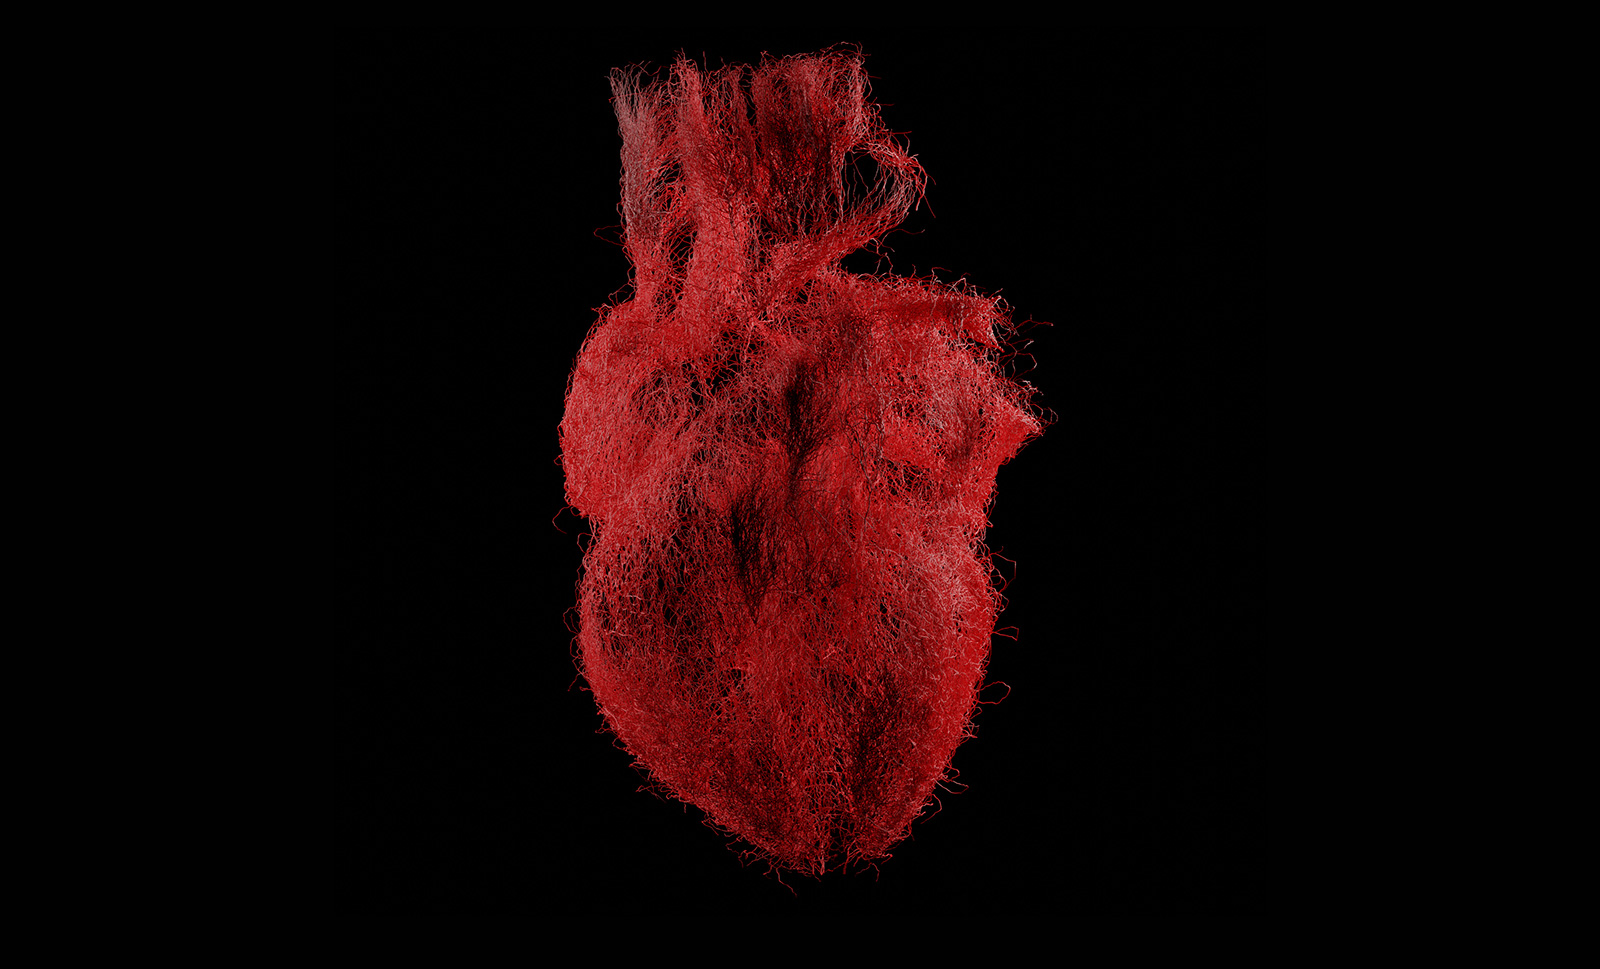 A still of a moving graphic depicting a human heart.